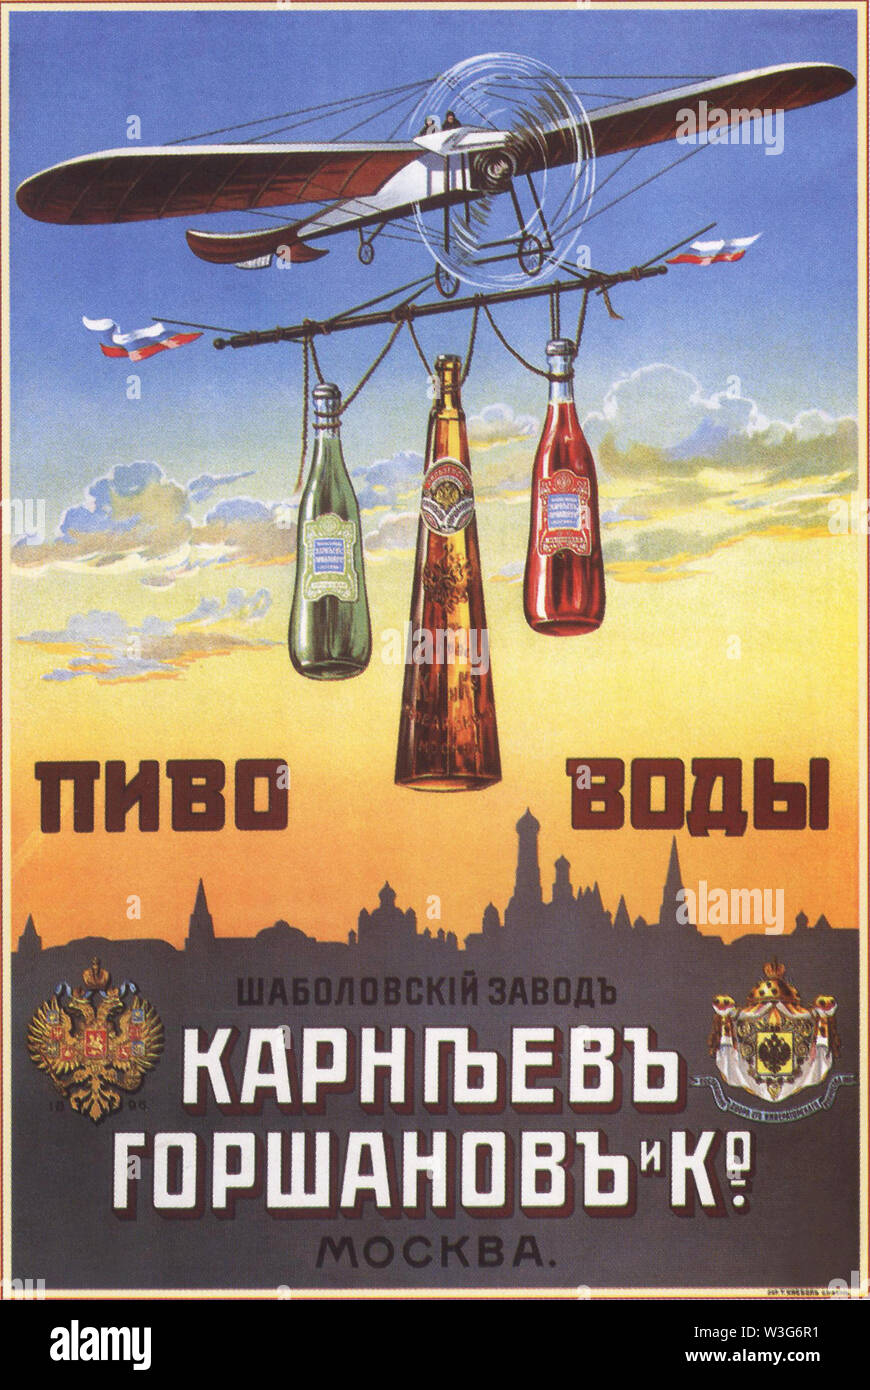 Beer. Water. Shabolovsky factory. Karneev Gorshanov and Co. Moscow. Russian advertising poster. 1910. Stock Photo